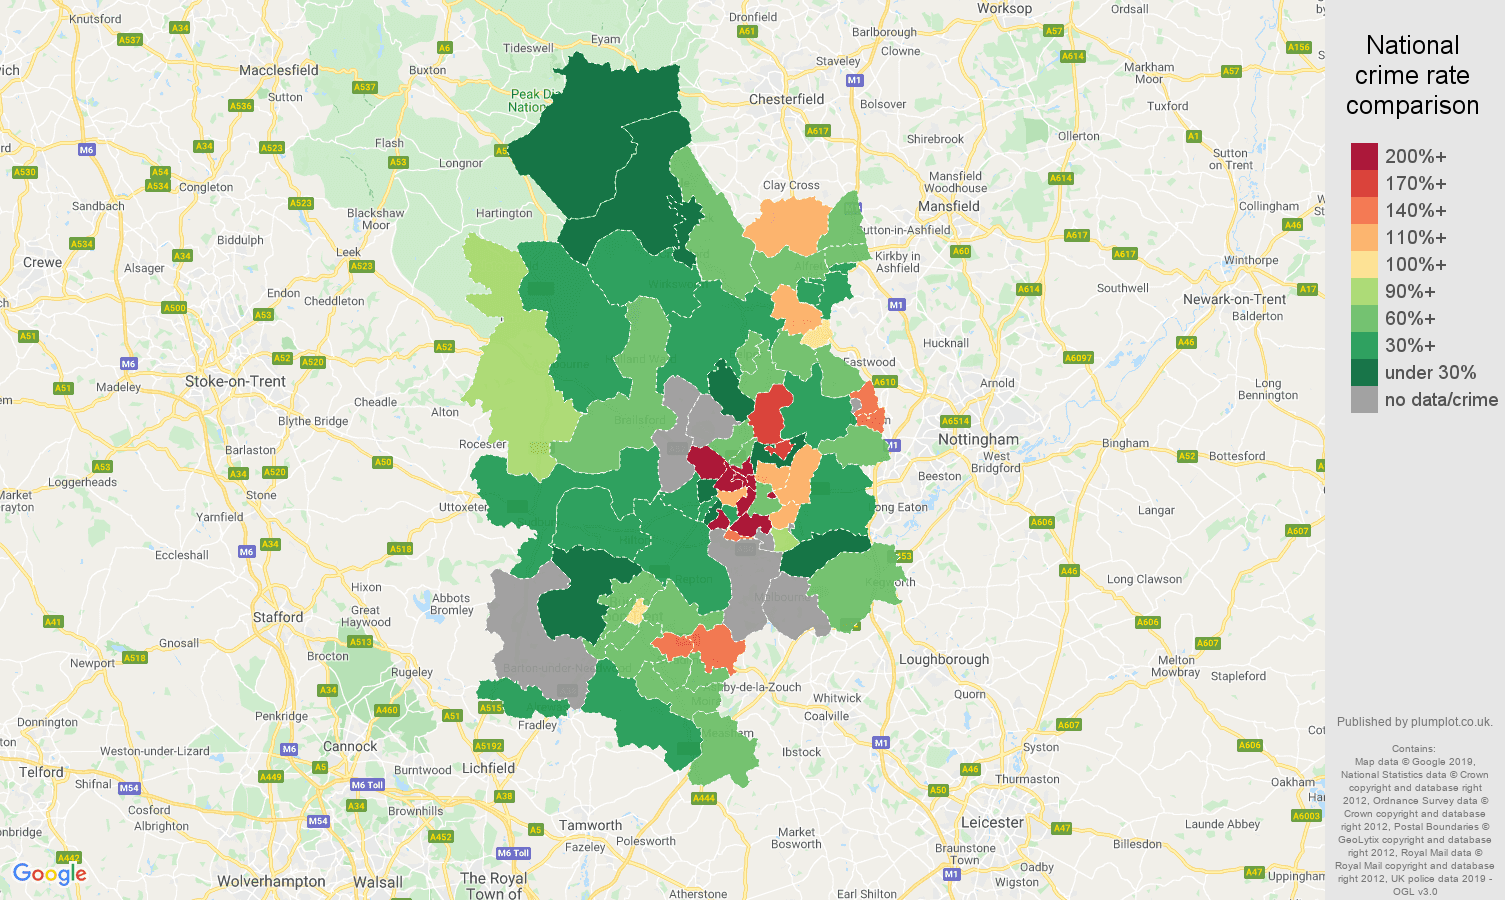 Derby possession of weapons crime rate comparison map